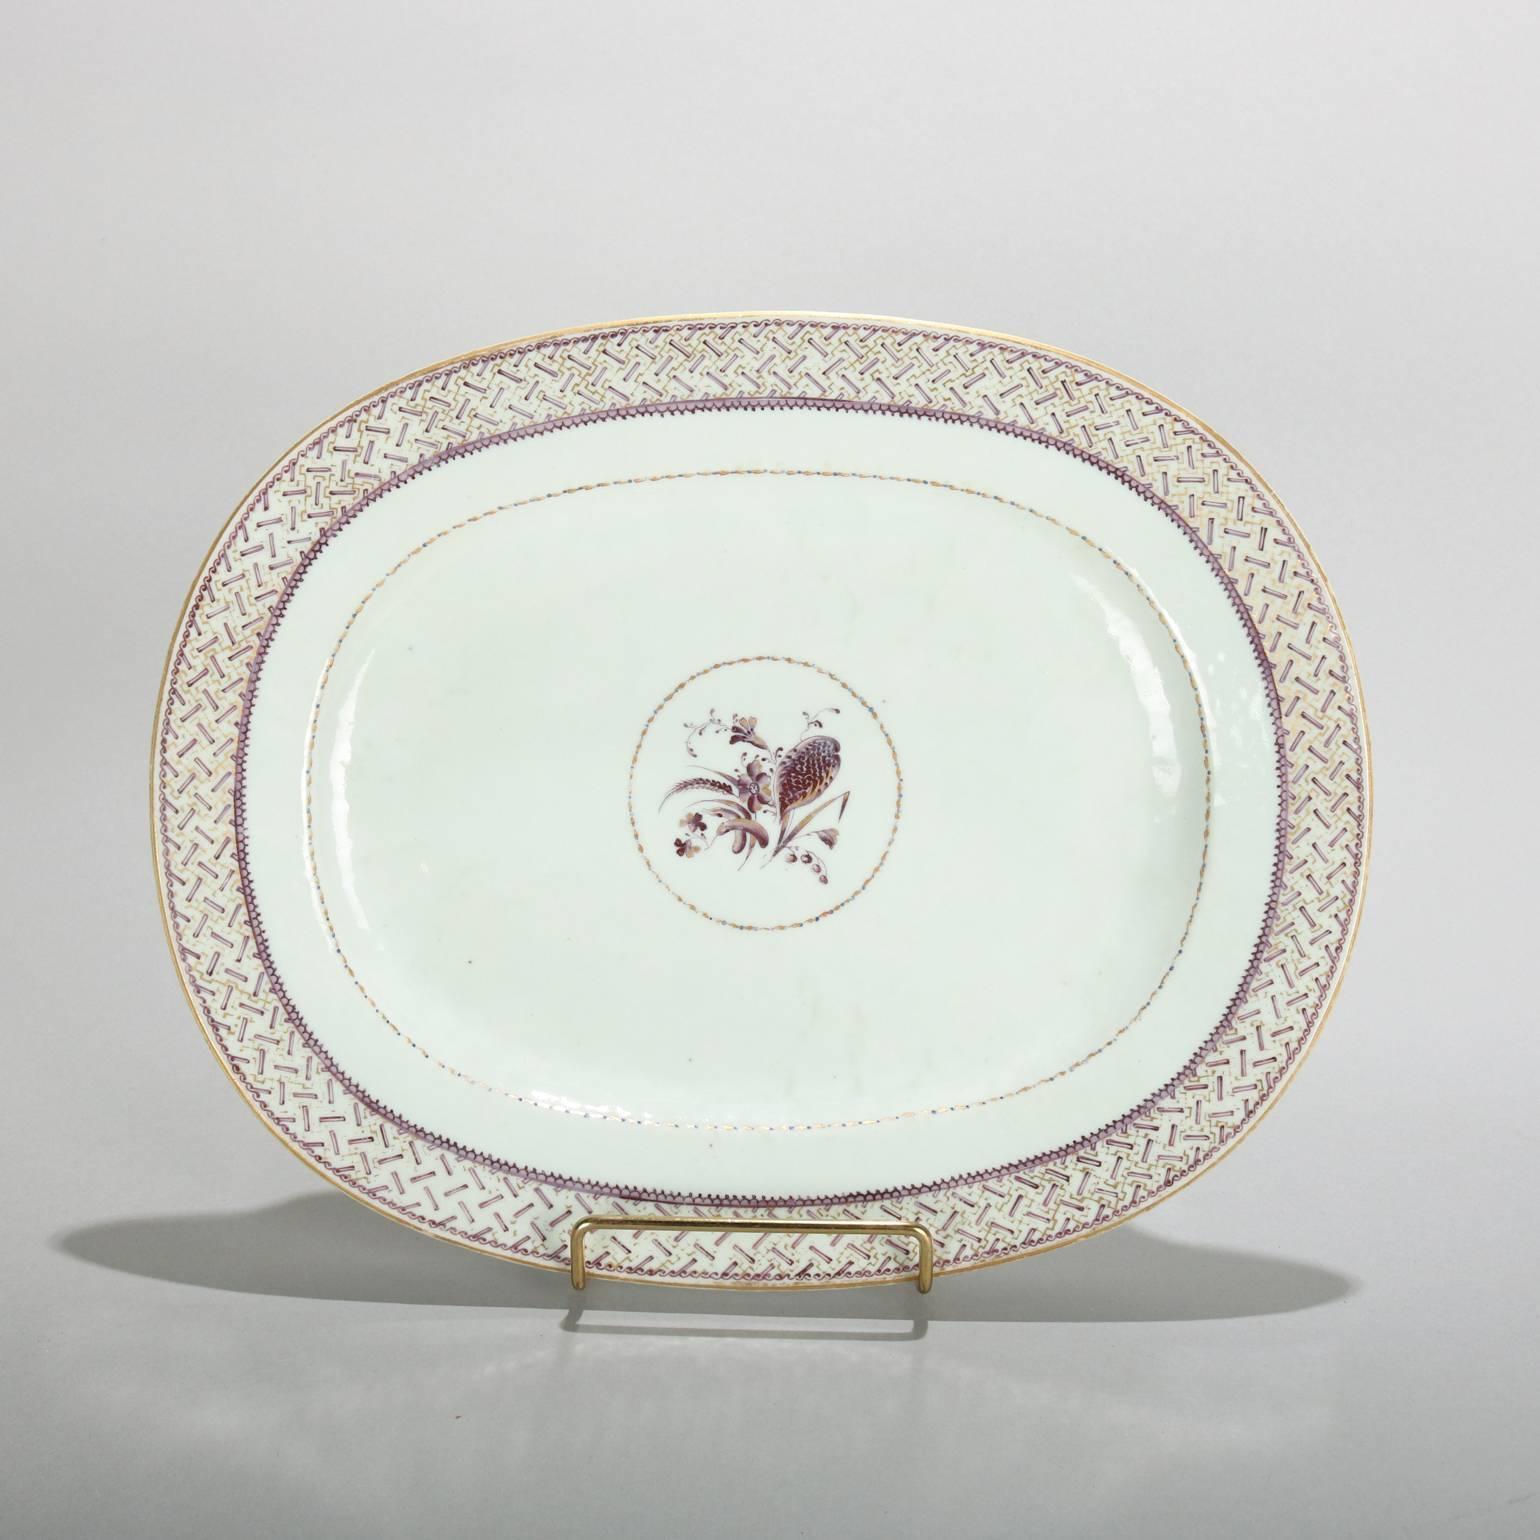 Pair of Chinese Export Lowestoft antique porcelain platters feature lavender and gilt central barley pattern with basket weave pattern on rims, en verso label reads Oriental Lowestoft, early 19th century.

Measures: 1" H x 12" W x